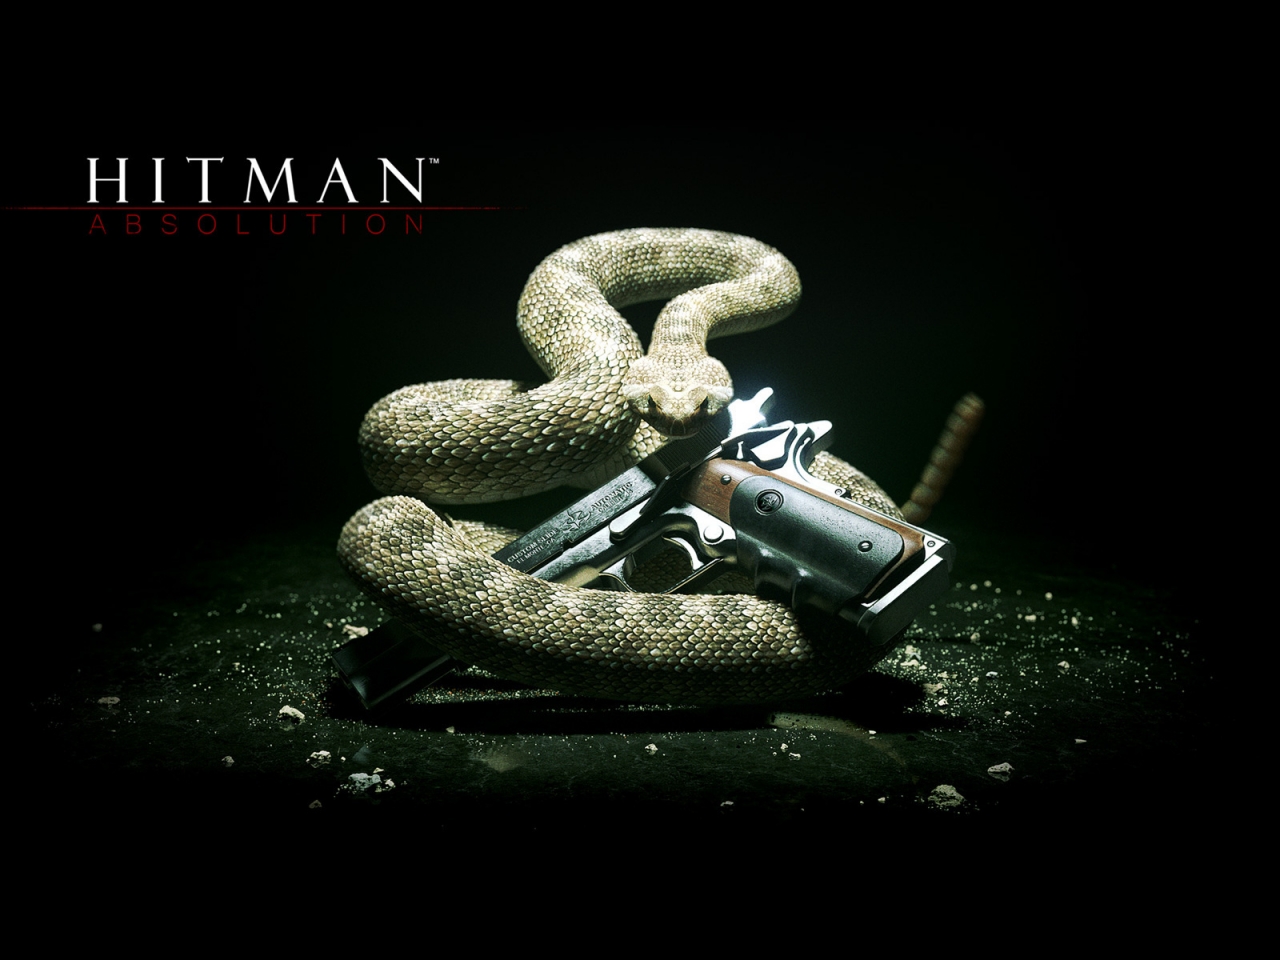 Hitman Absolution Game for 1280 x 960 resolution